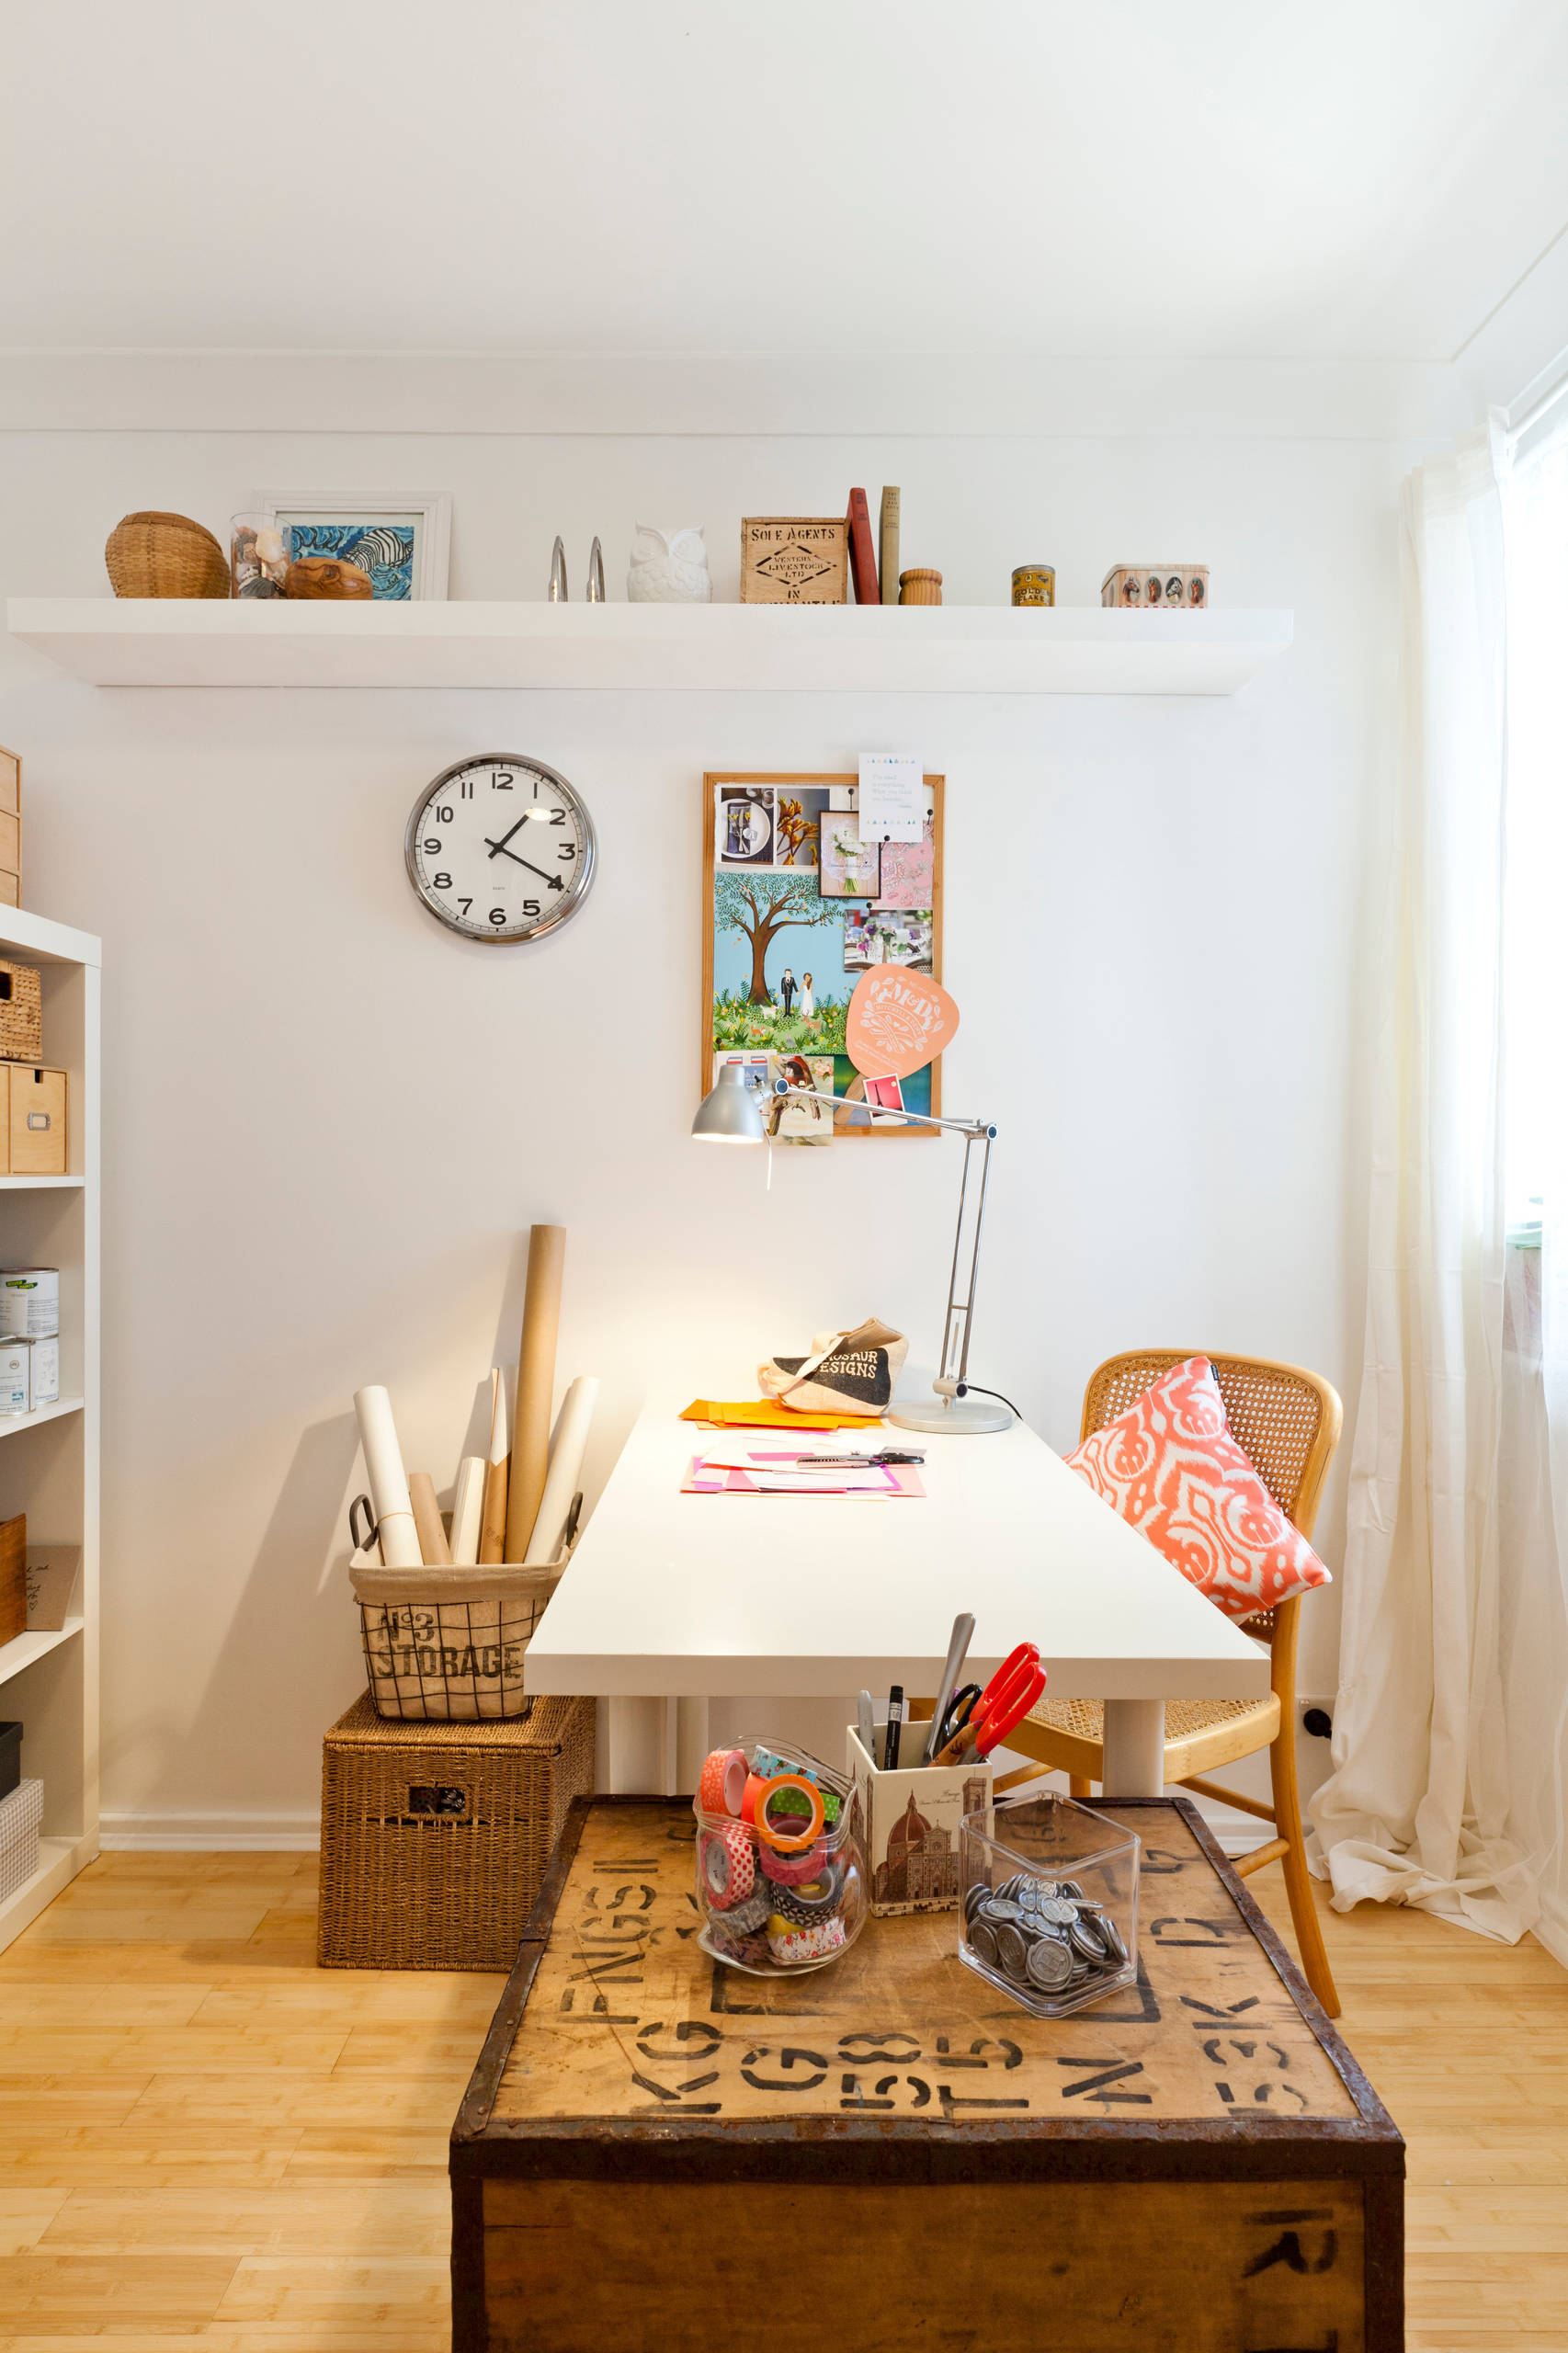 A Junk Room Turned Craft Room - Eclectic - Home Office - Perth - by House  Nerd | Houzz